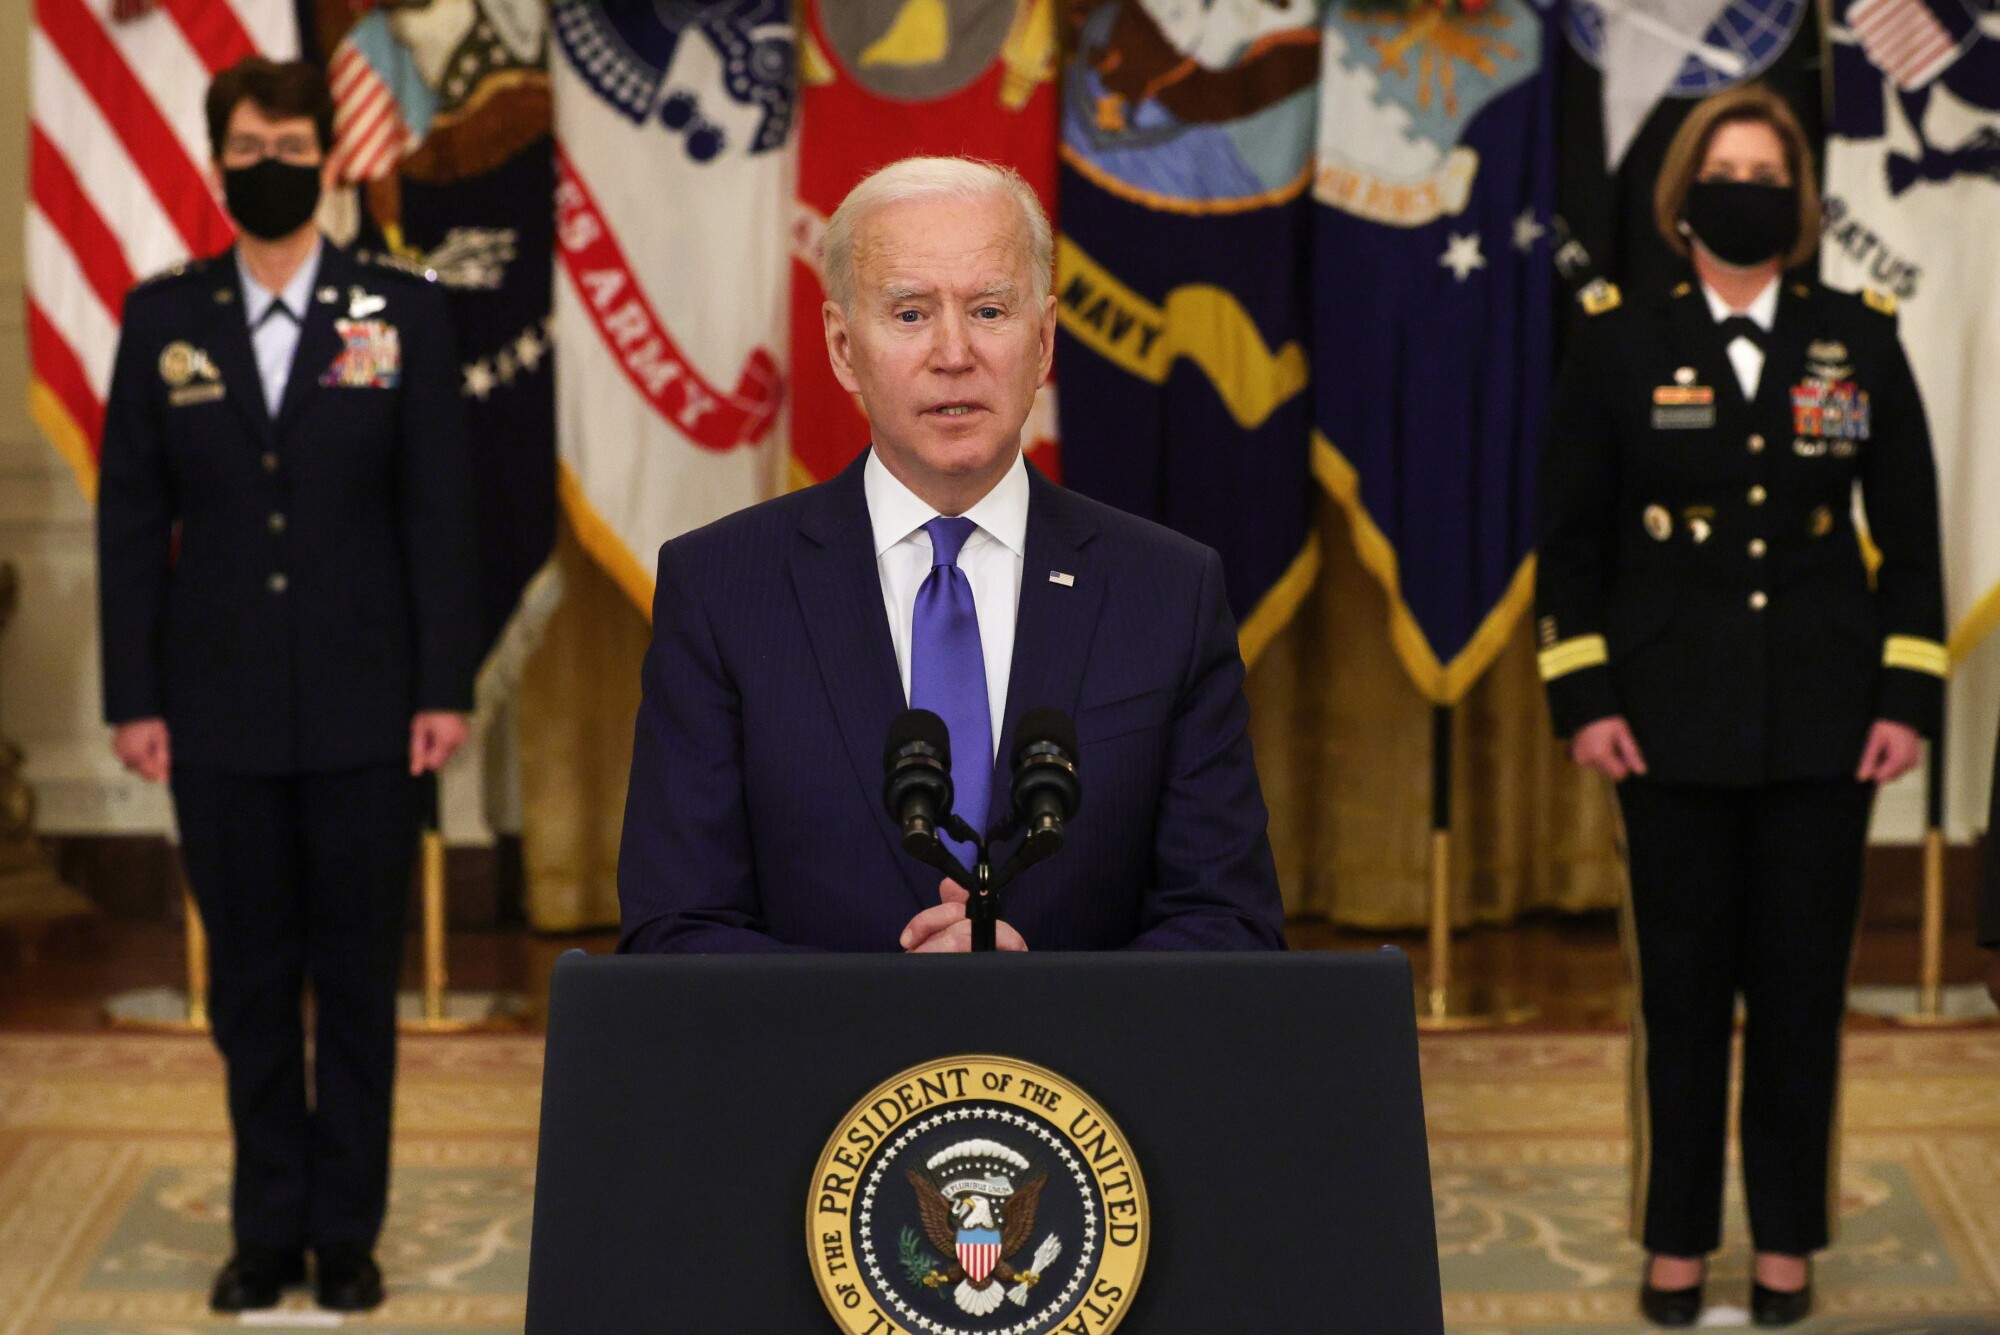 Biden Signs 2 Executive Orders on Gender Issues